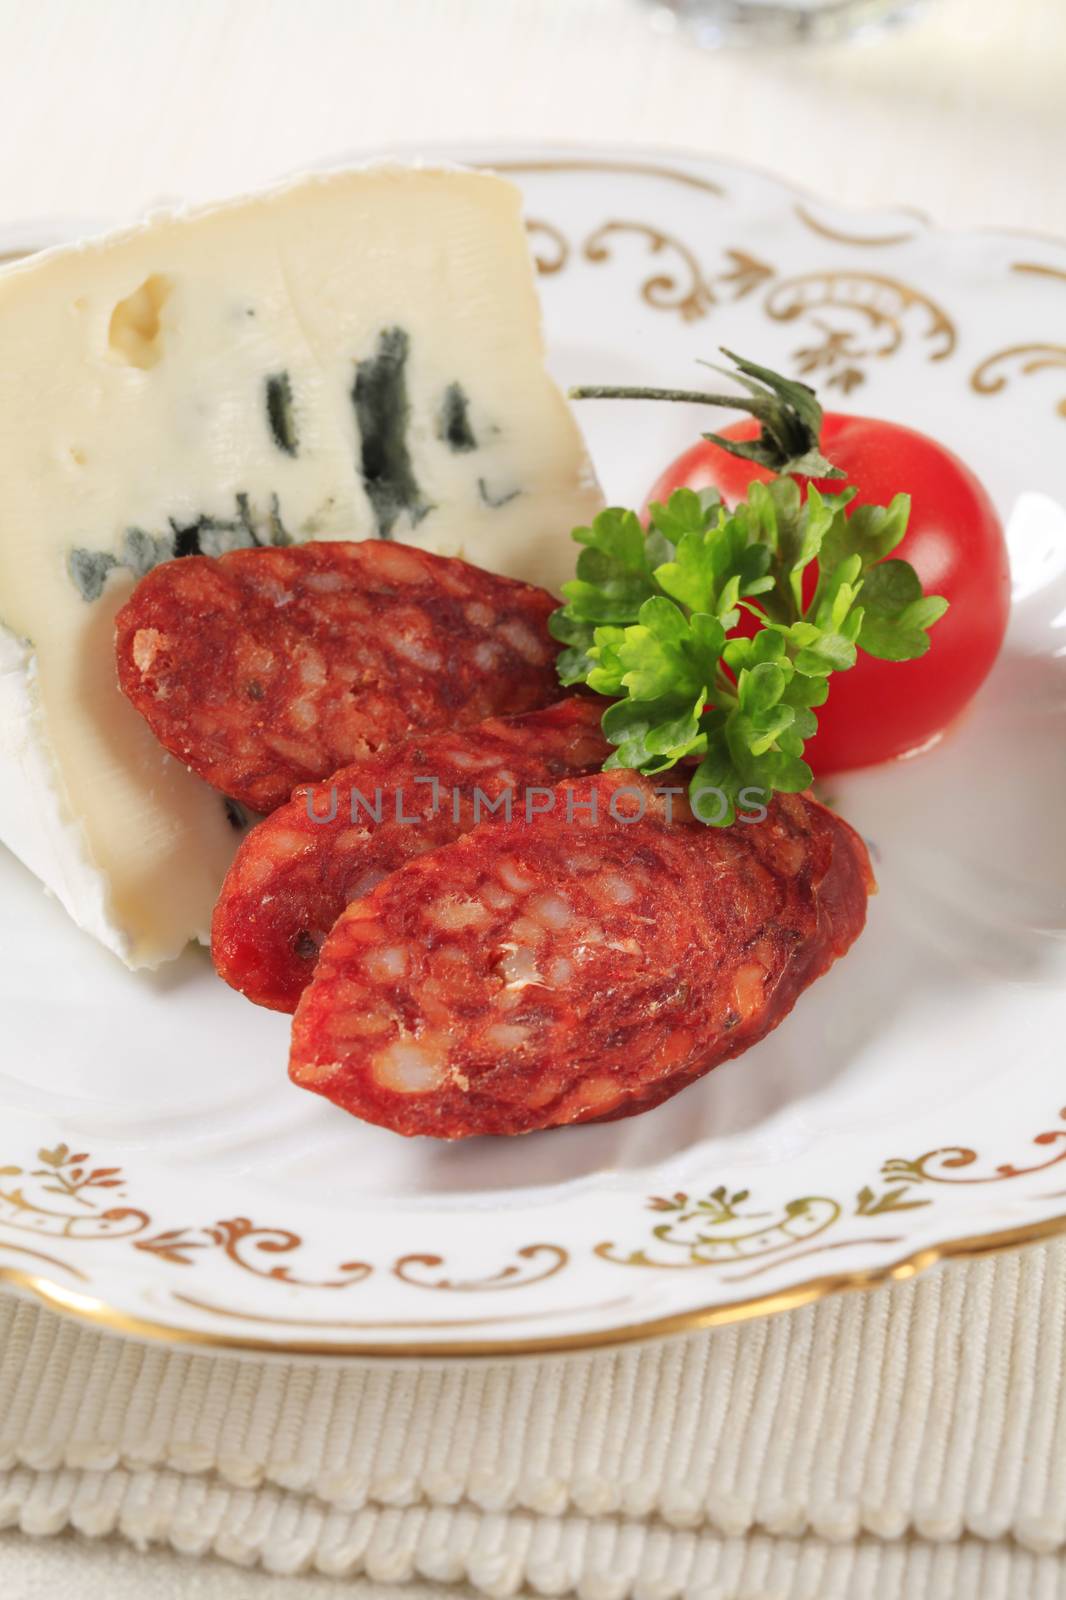 Blue cheese and slices of spicy sausage